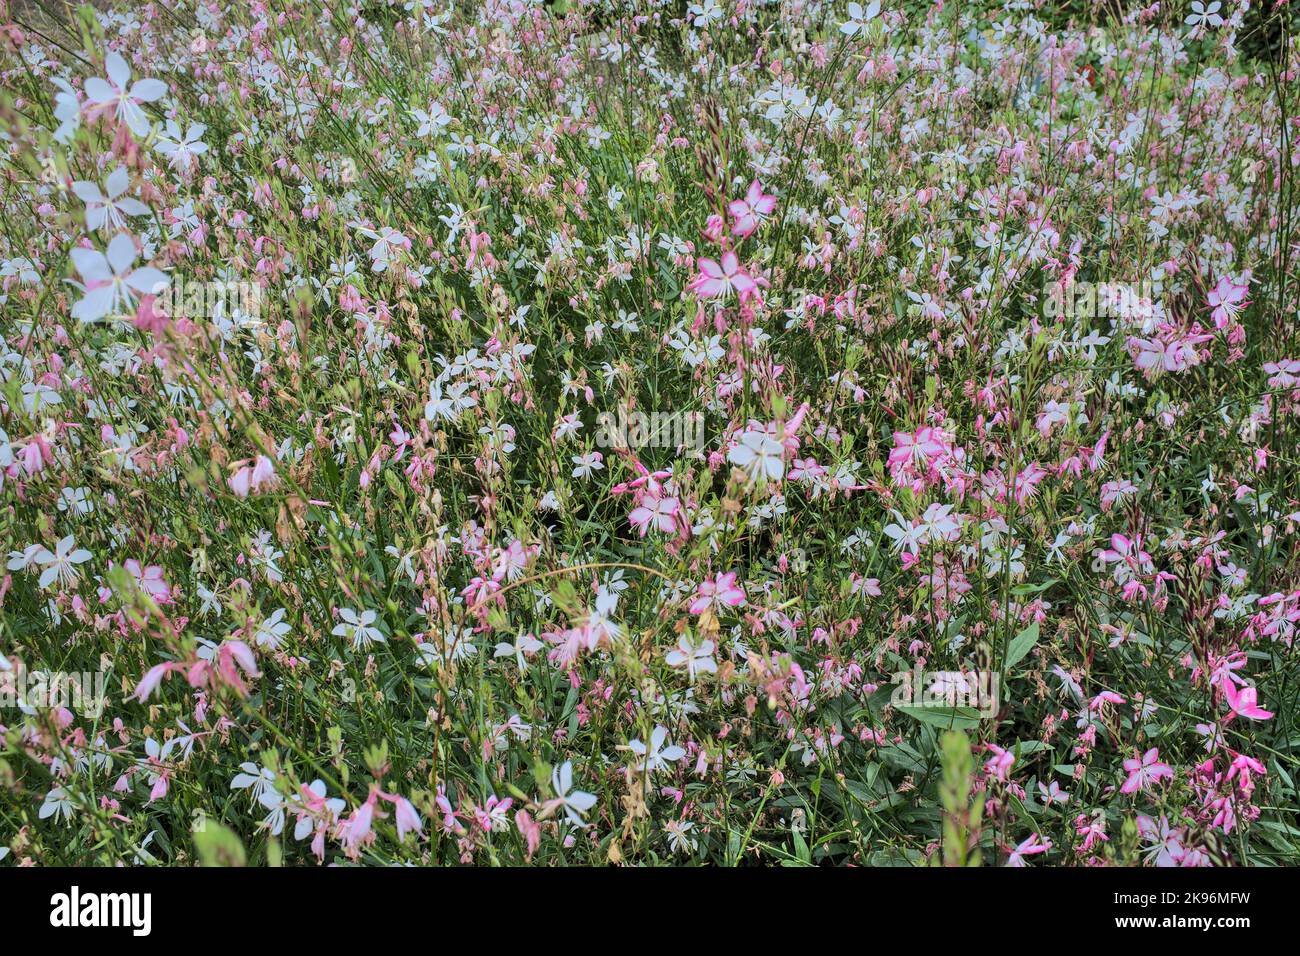 Flowering pink and white Gaura lindheimeri filling the frame Stock Photo